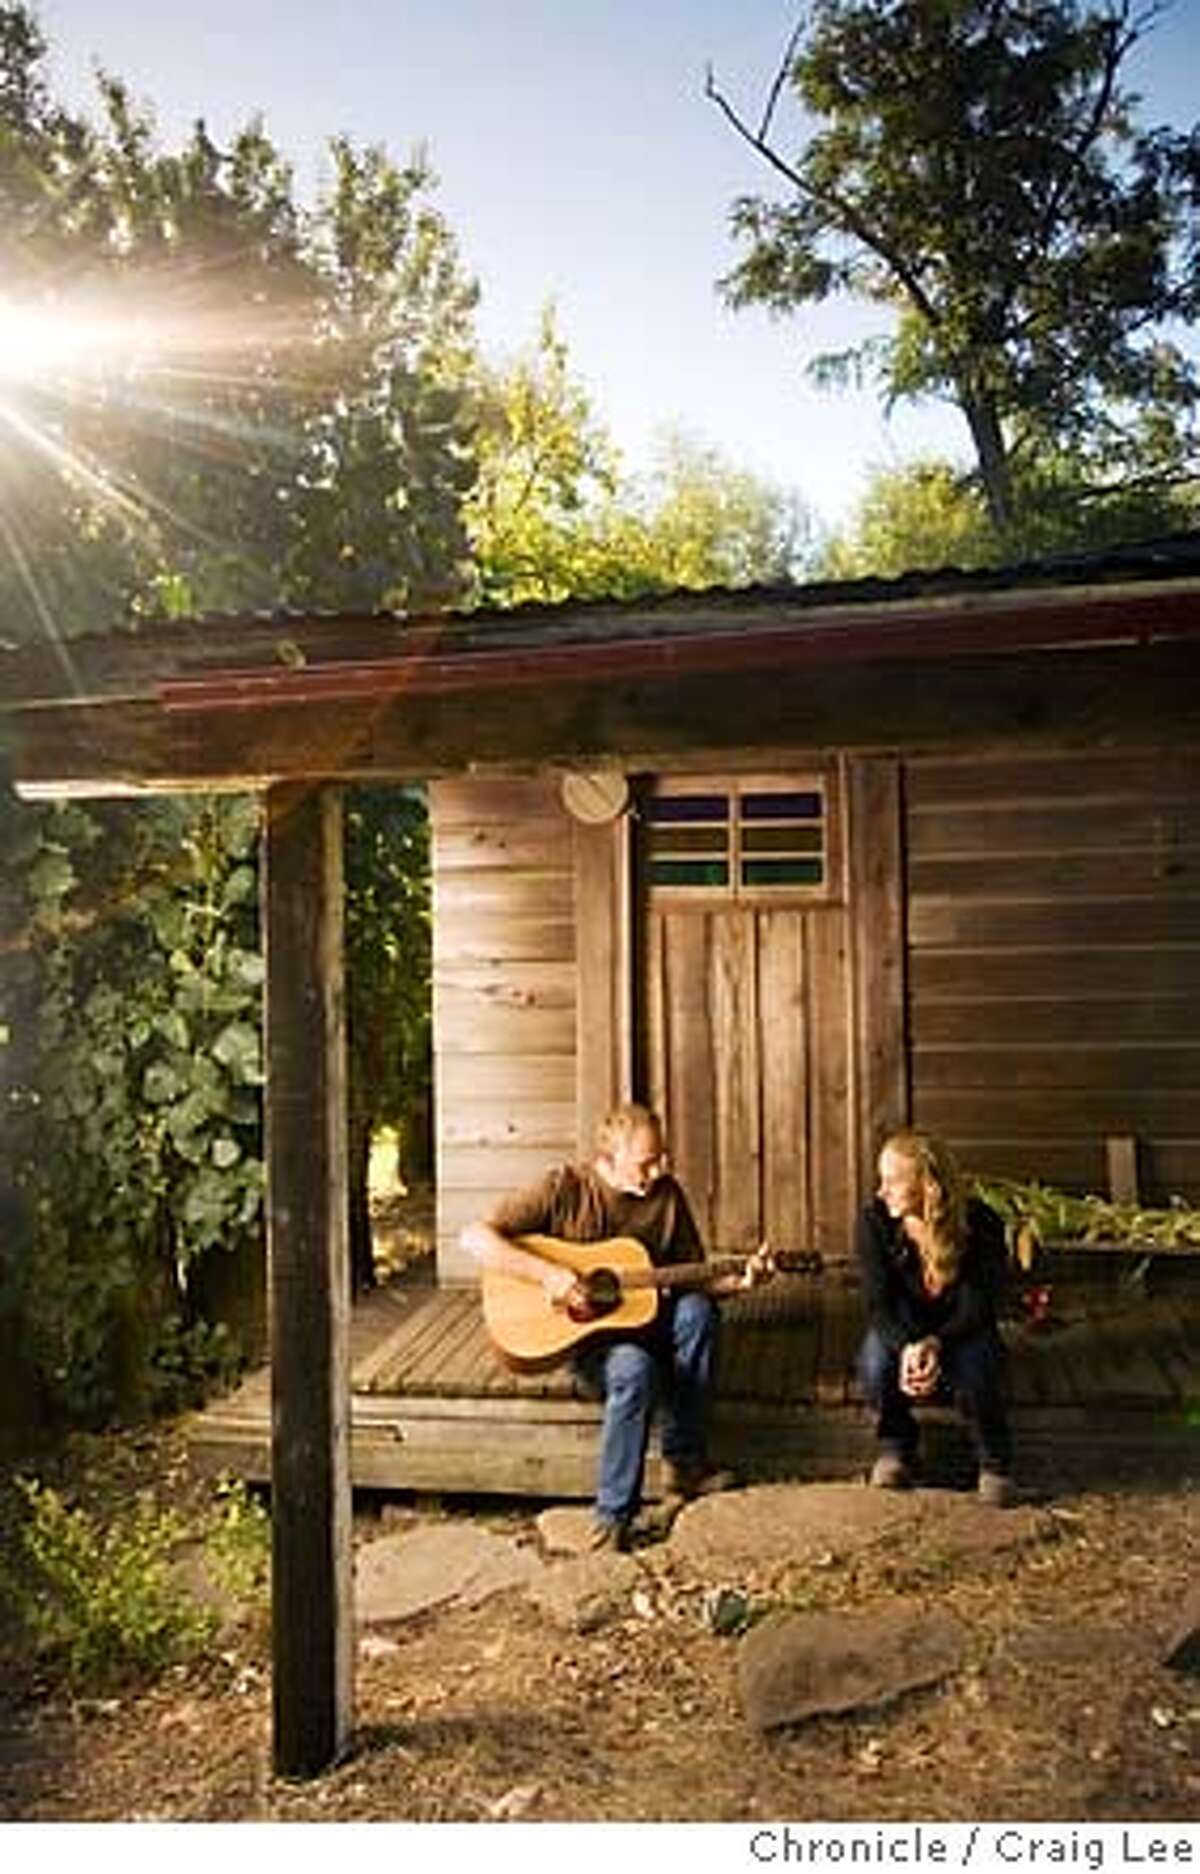 OTHERNAPA07_311_cl.jpg Story about Napa Valley wineries that have avoided the spotlight. Lore Olds and his daughter Mayacamus, owner of Sky Vineyards at the top of 2200 feet Mount Veeder. Photo of Lore (left) and Mayacamus (right), sitting and playing guitar on his front porch to the home he built in 1972 and where Mayacamus grew up. on 8/24/07 in Napa. photo by Craig Lee / The Chronicle Ran on: 09-02-2007 MANDATORY CREDIT FOR PHOTOG AND SF CHRONICLE/NO SALES-MAGS OUT